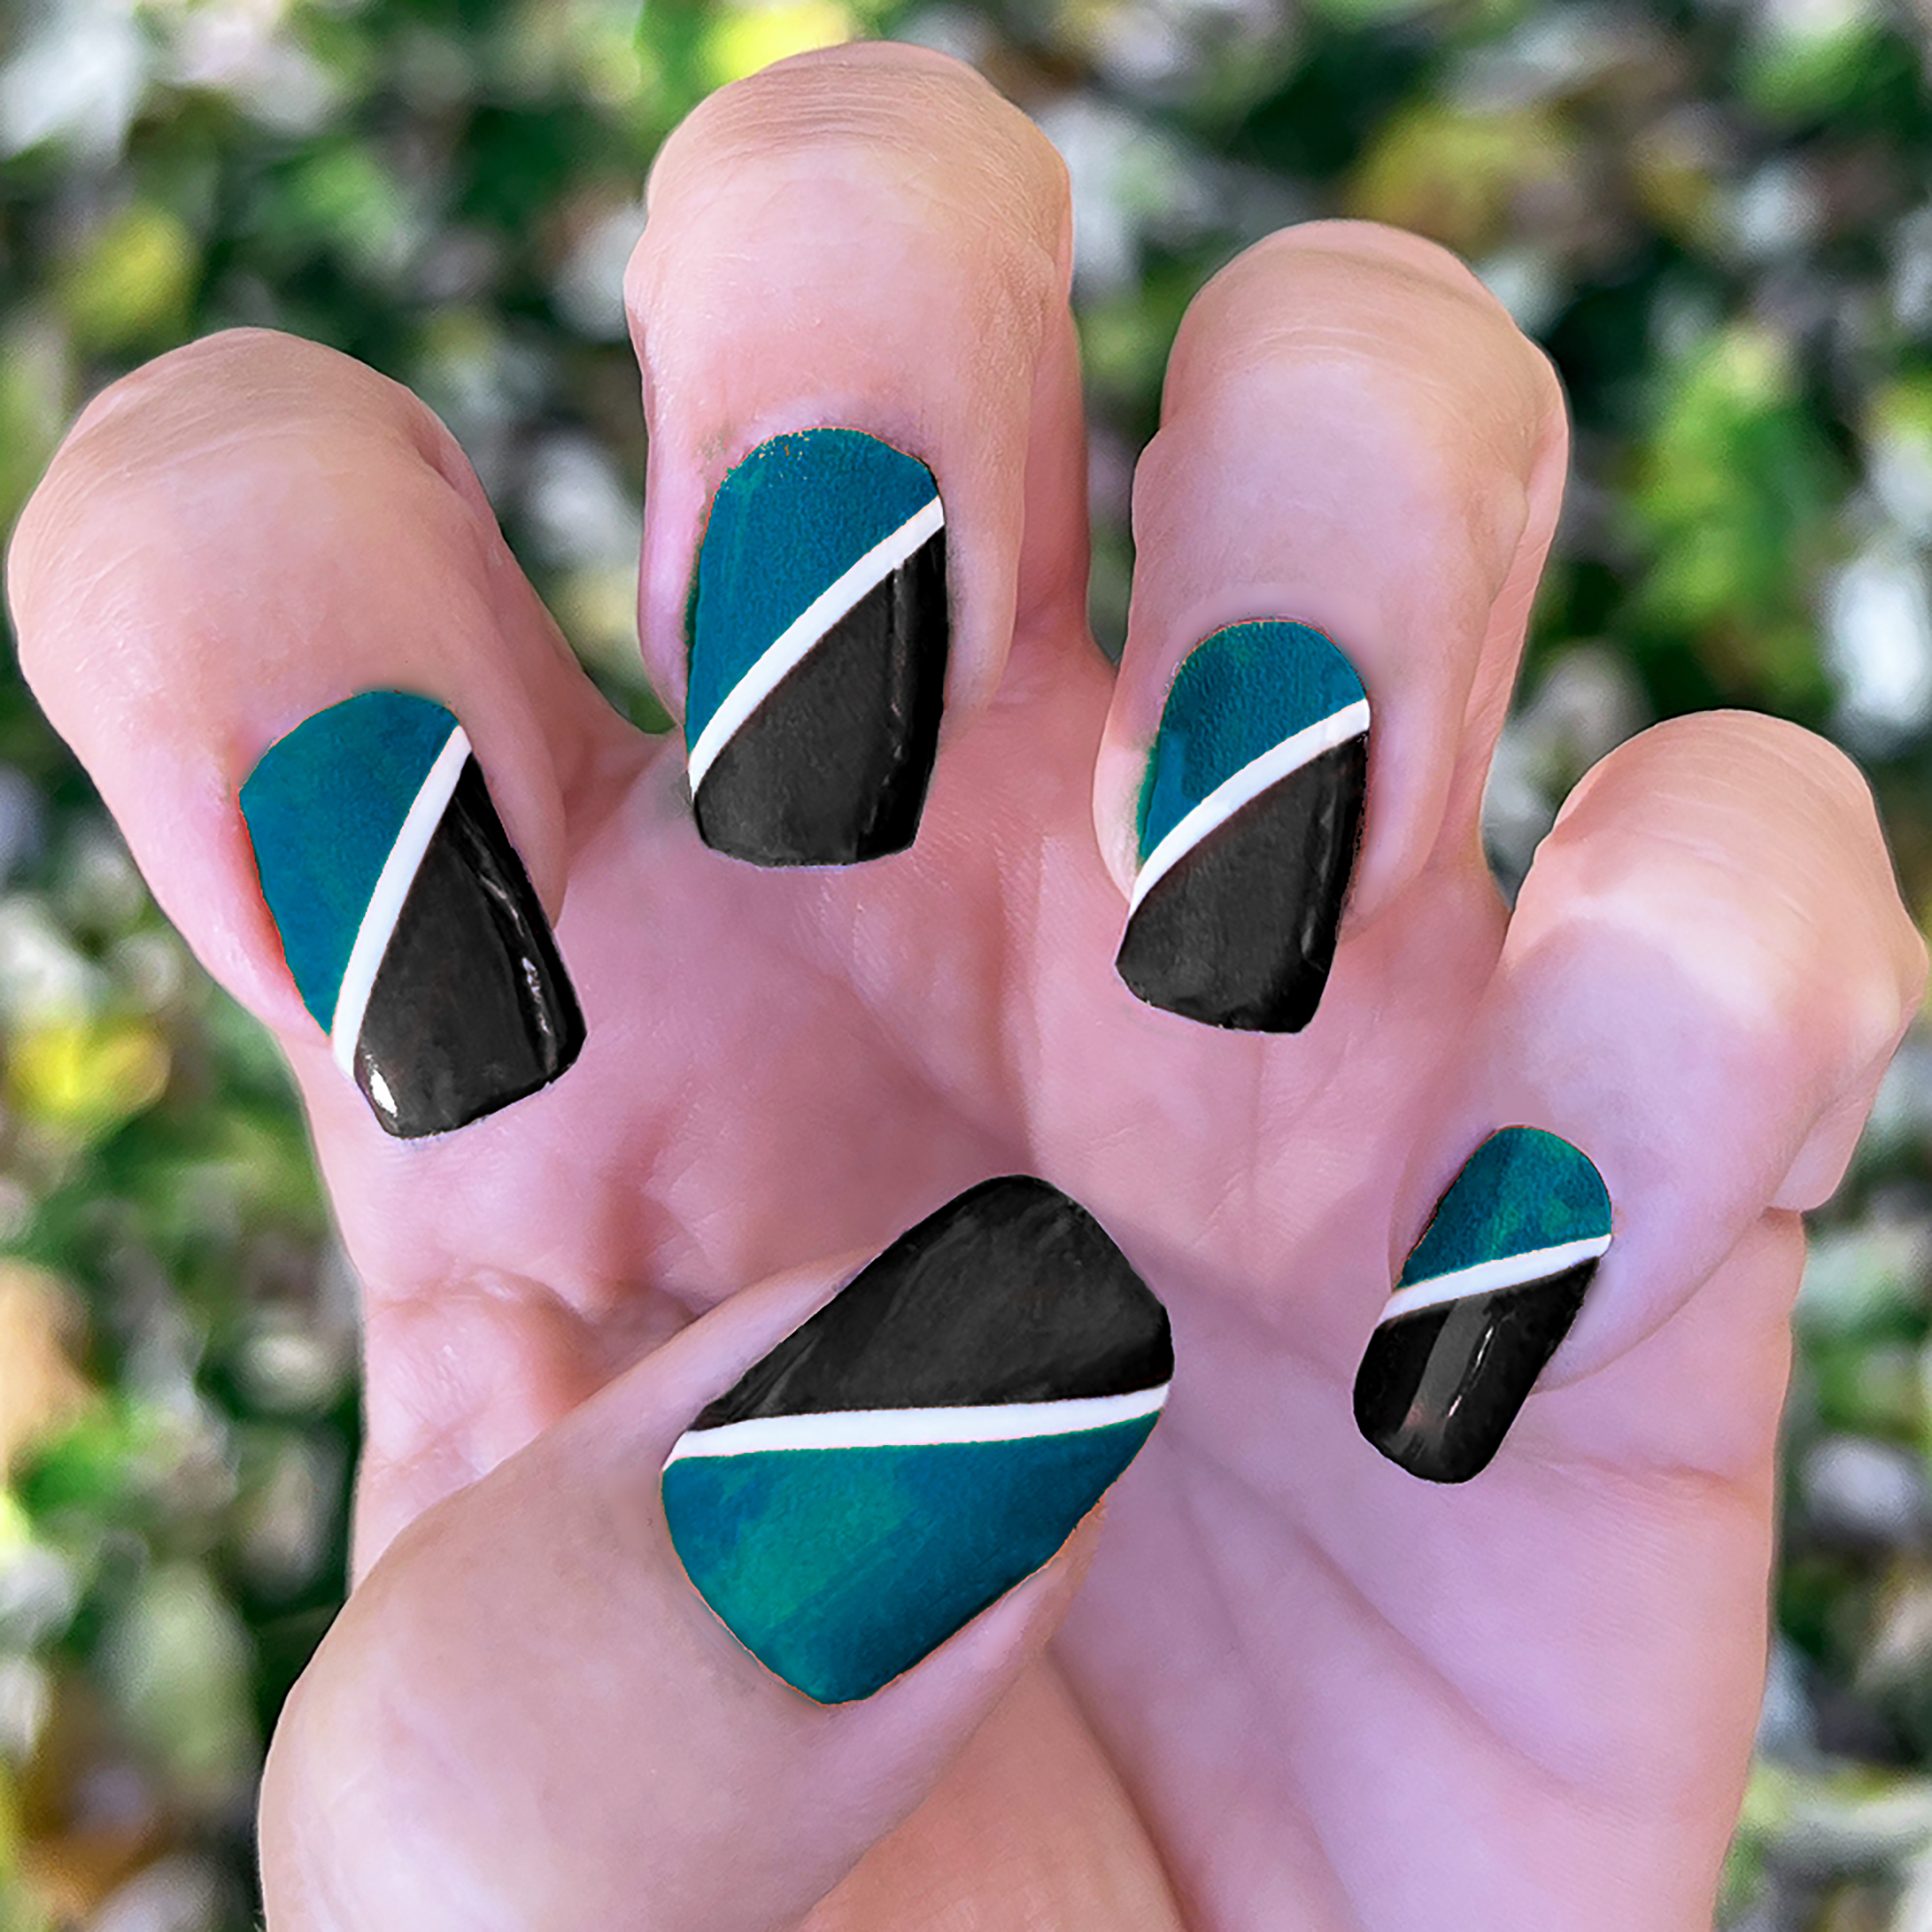 45 Best Fall Nail Ideas 2021 : Green and White nails with Gold Foil Accents  | White nails, White nails with gold, Emerald nails